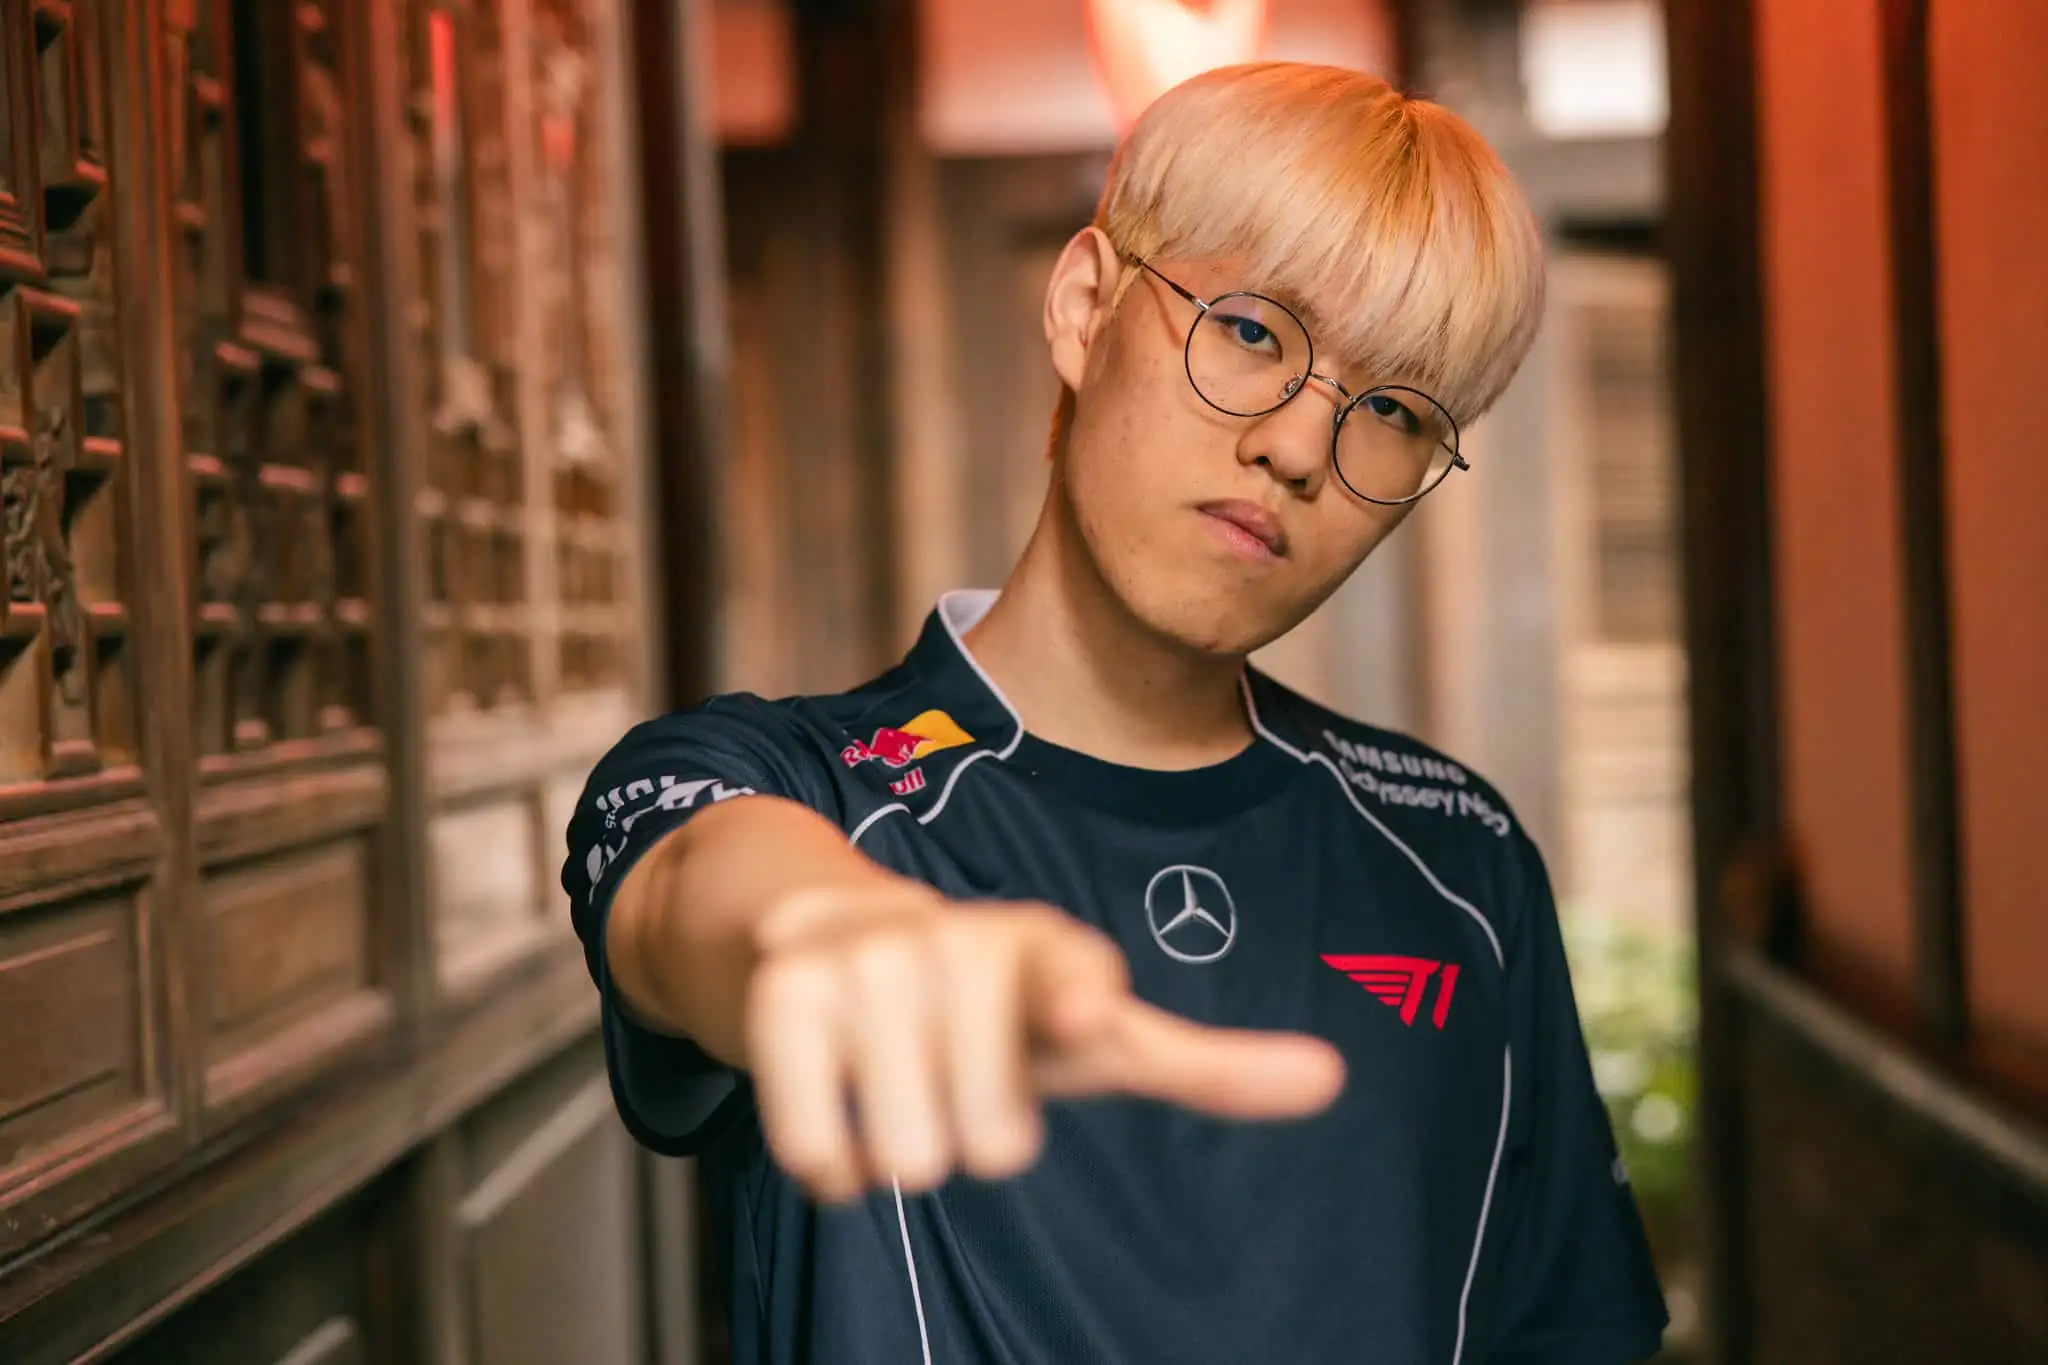 T1 Oner’s Worlds skin could get a feisty interaction with an SKT legend